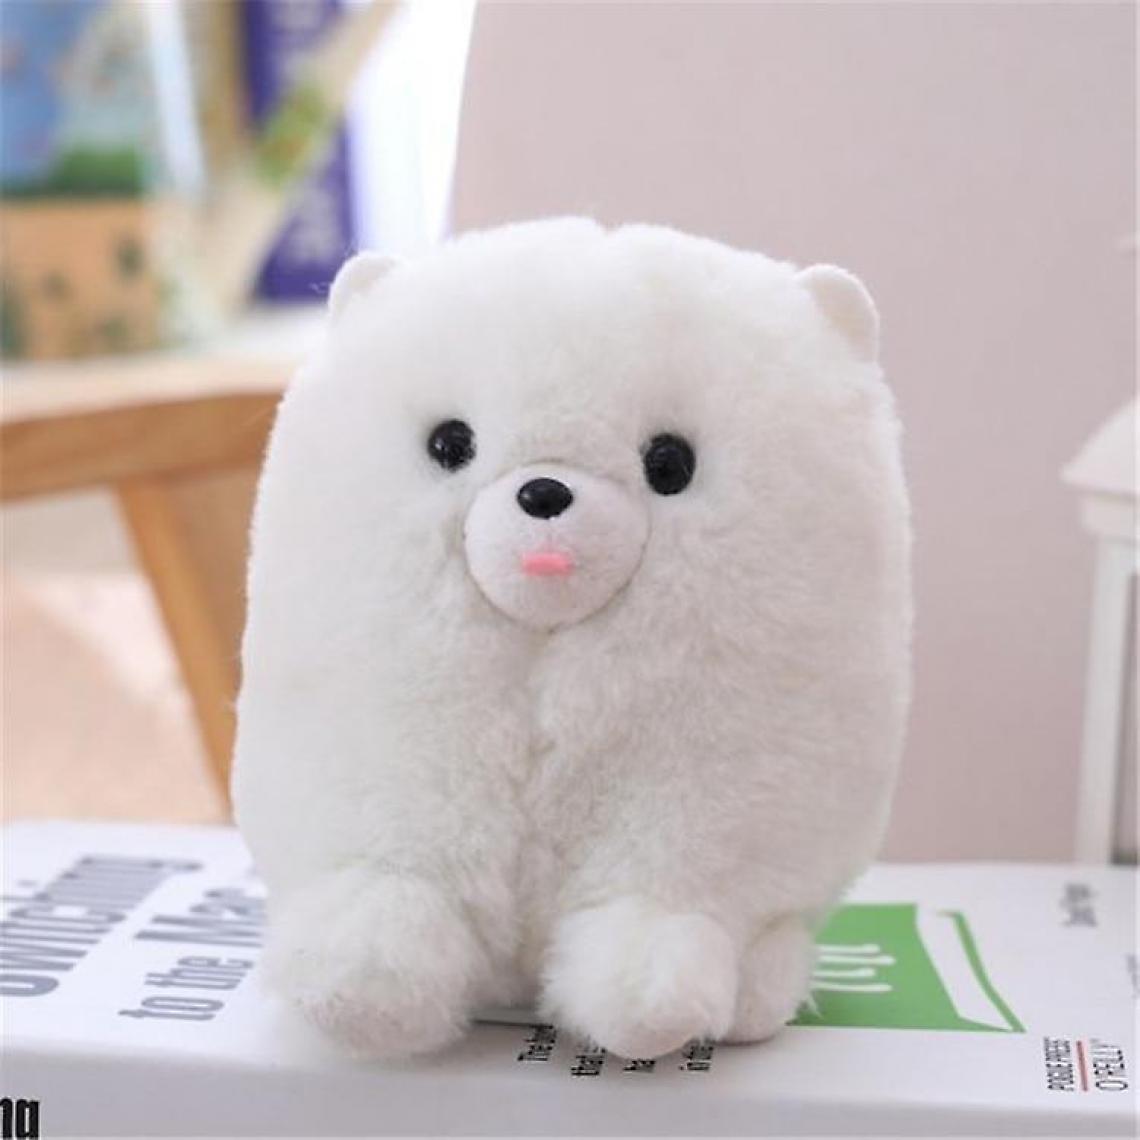 Universal - Electronique, Discours/Conversations/Disques sonores Sweet Toy Dog (blanc) - Animaux